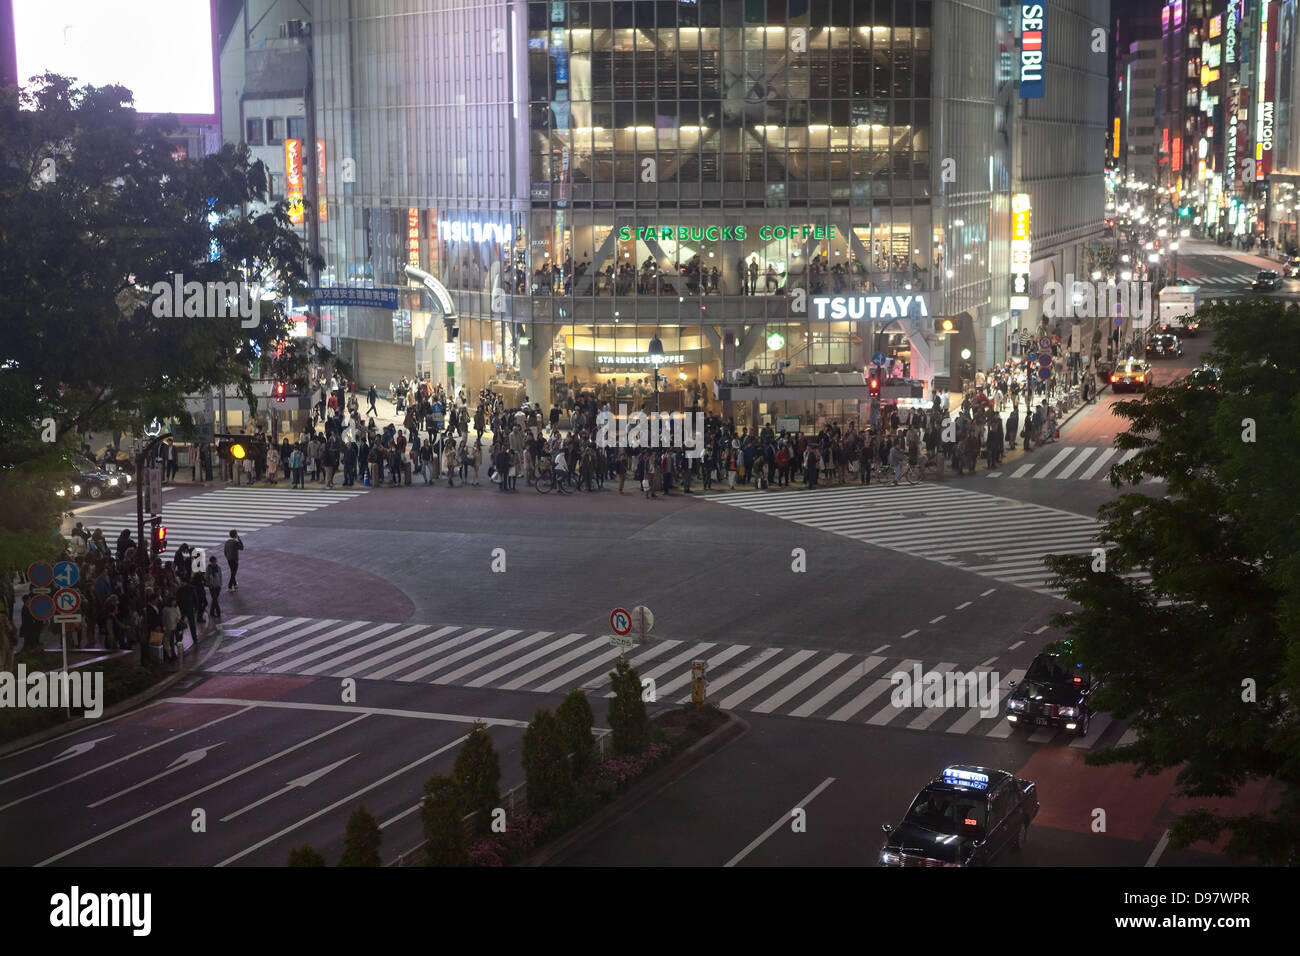 Shibuya Crossing is famous place for scramble crossing in Tokyo city, Japan. Night view. Empty intersection Stock Photo